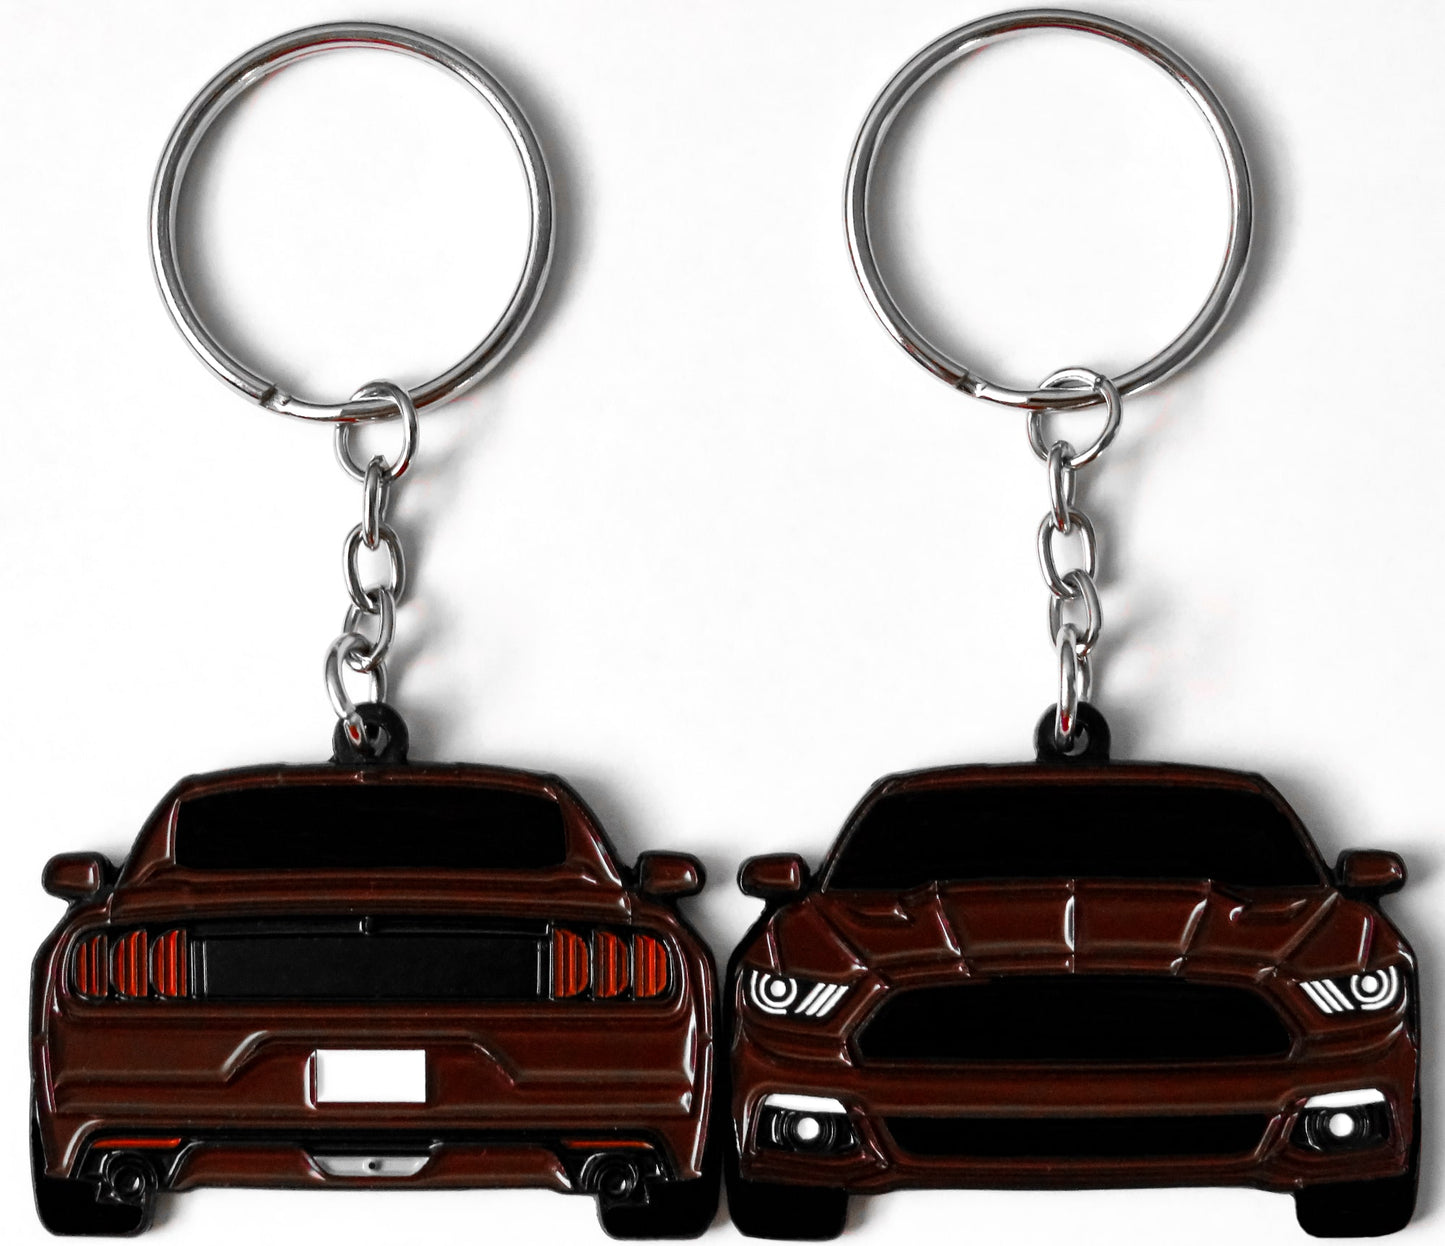 Keychain that fits on a key fob cover for Ford Mustang Ruby Red sixth generation S550 Stang lanyard for car guys and enthusiasts, girlfriend, boyfriend, father, dad, mother, mom, him, her, and more. Apparel and parts 2015 2016 2017 2018 2019 2020 2021 2022 Ecoboost turbo cyclone 5.0 2.3